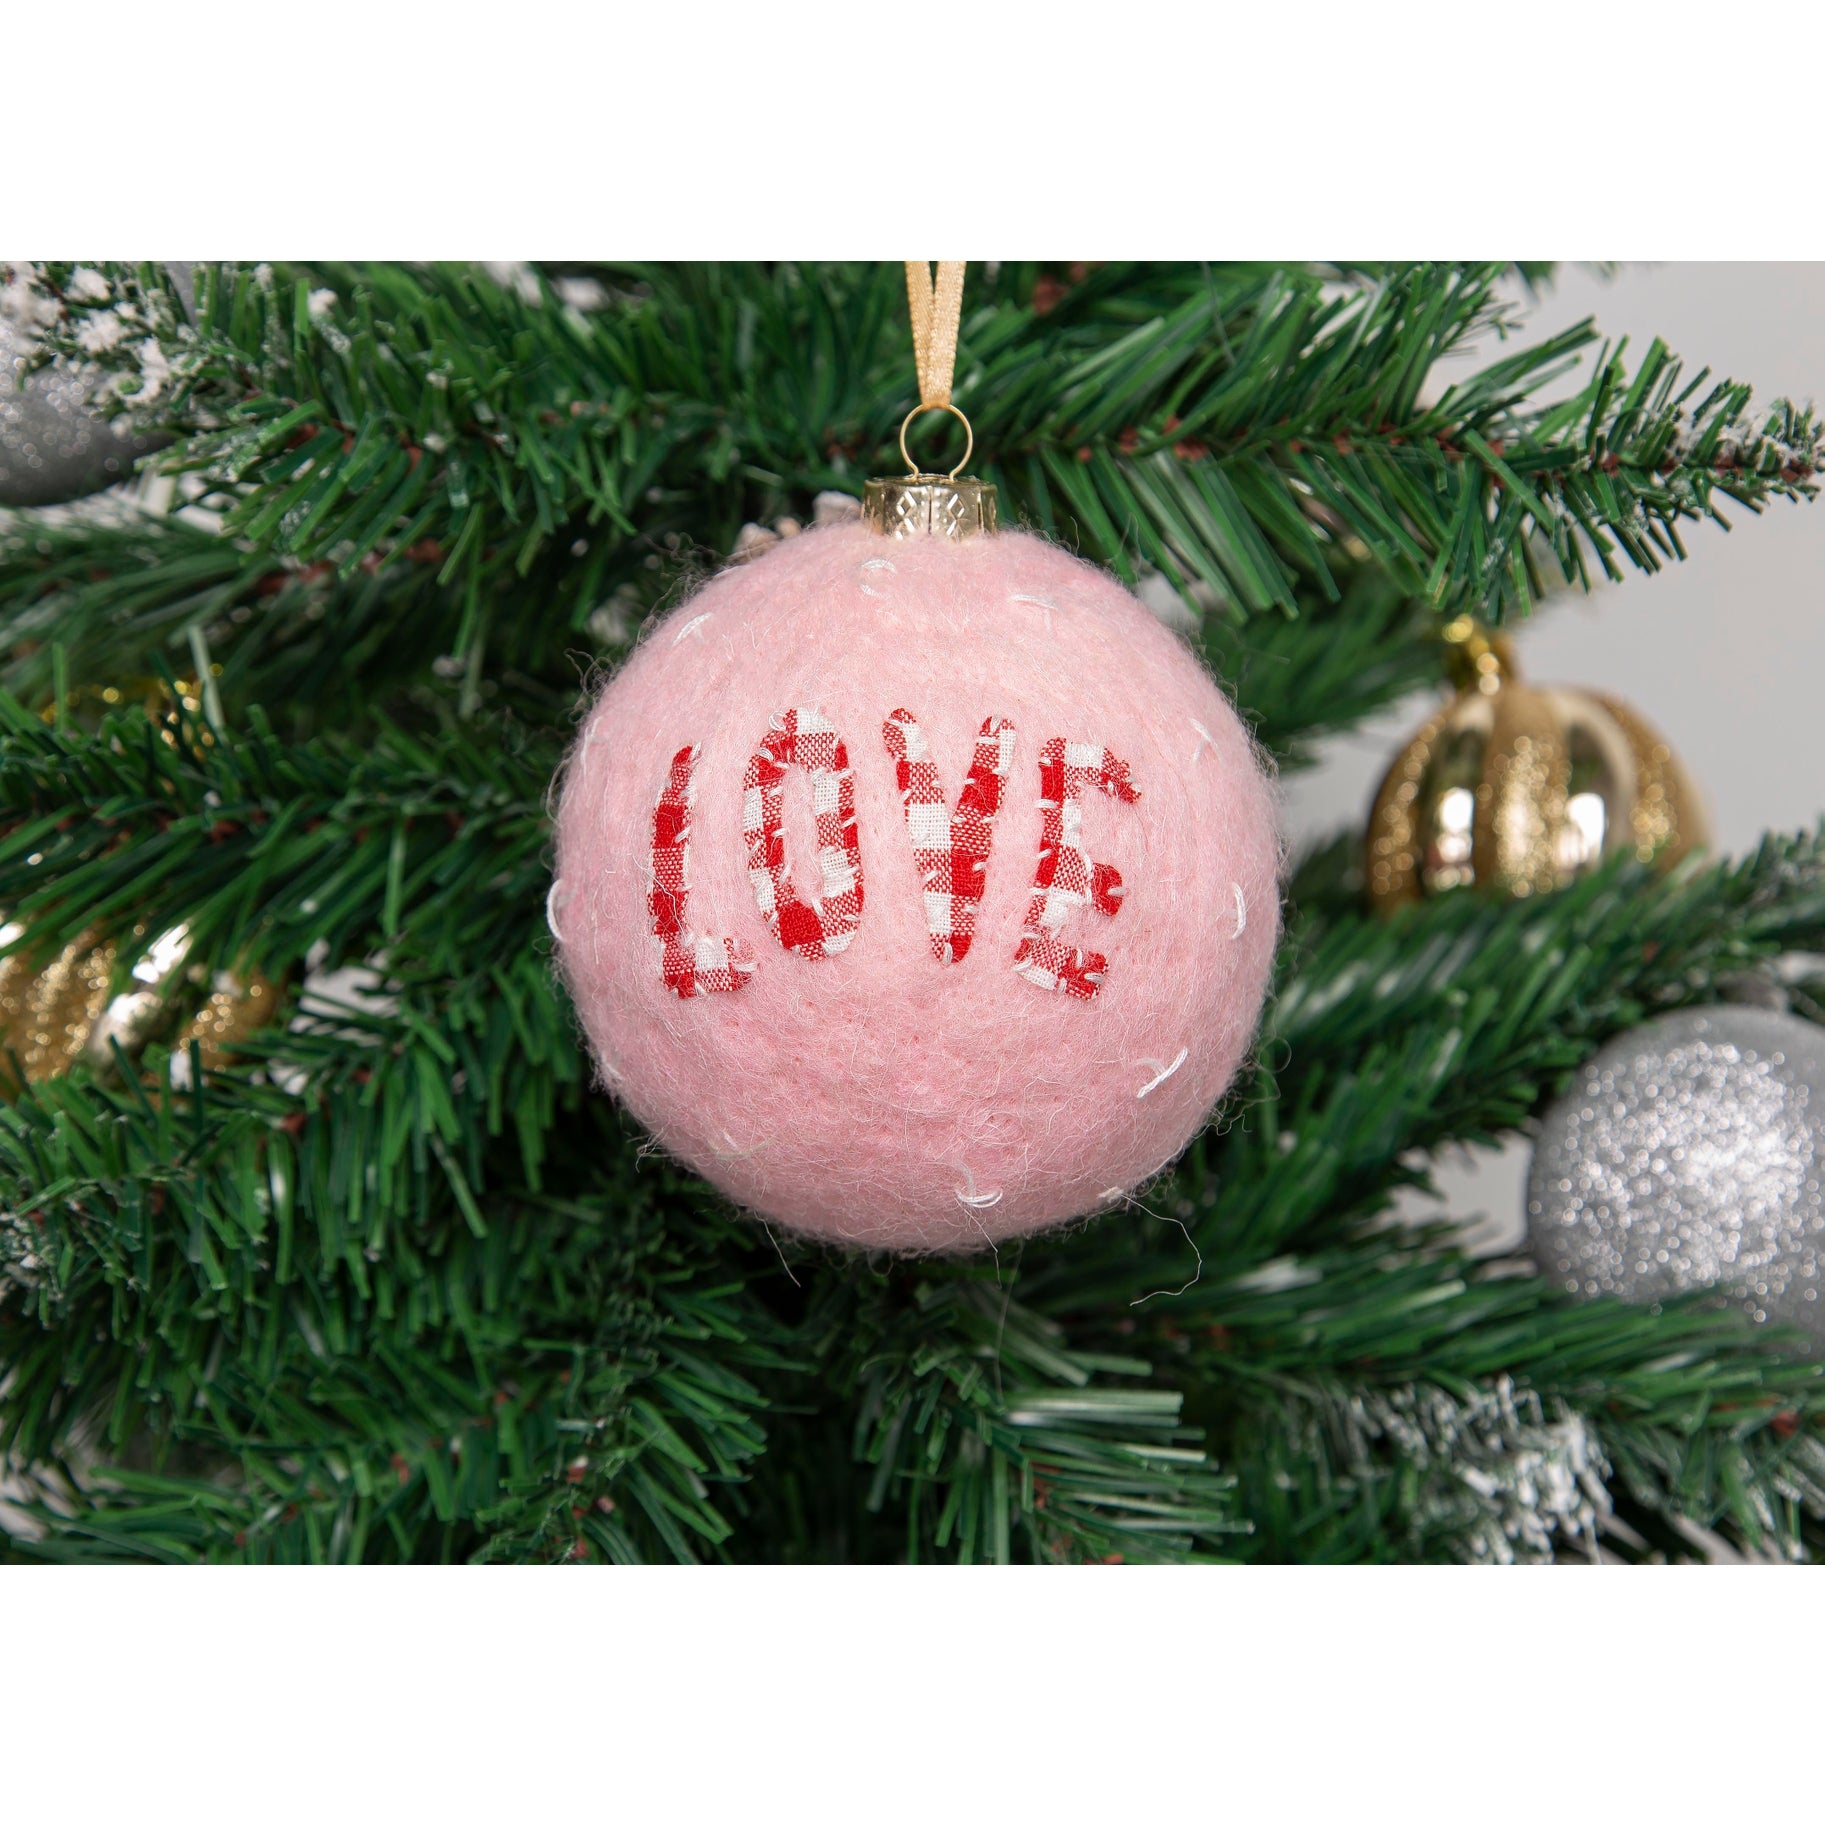 "Love" Holiday Ornament